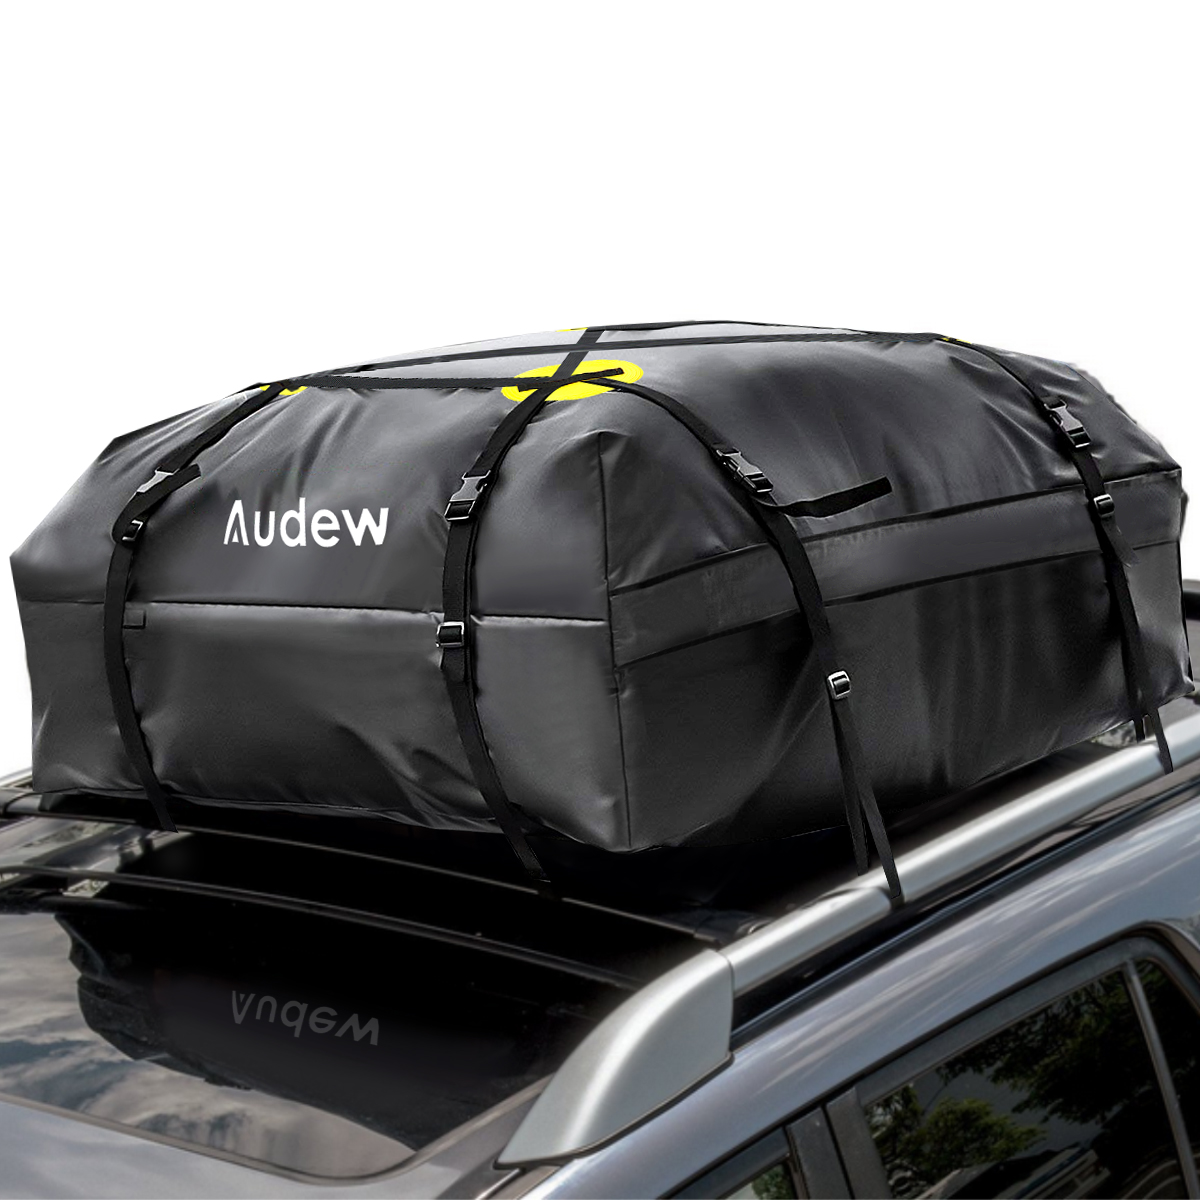 4+2 Door Hooks Included Black, 15 Cubic Feet Weatherproof Soft Rooftop Cargo Carrier Bag for Vehicles with or Without Rack MARCHWAY Waterproof Car Roof Luggage Bag 